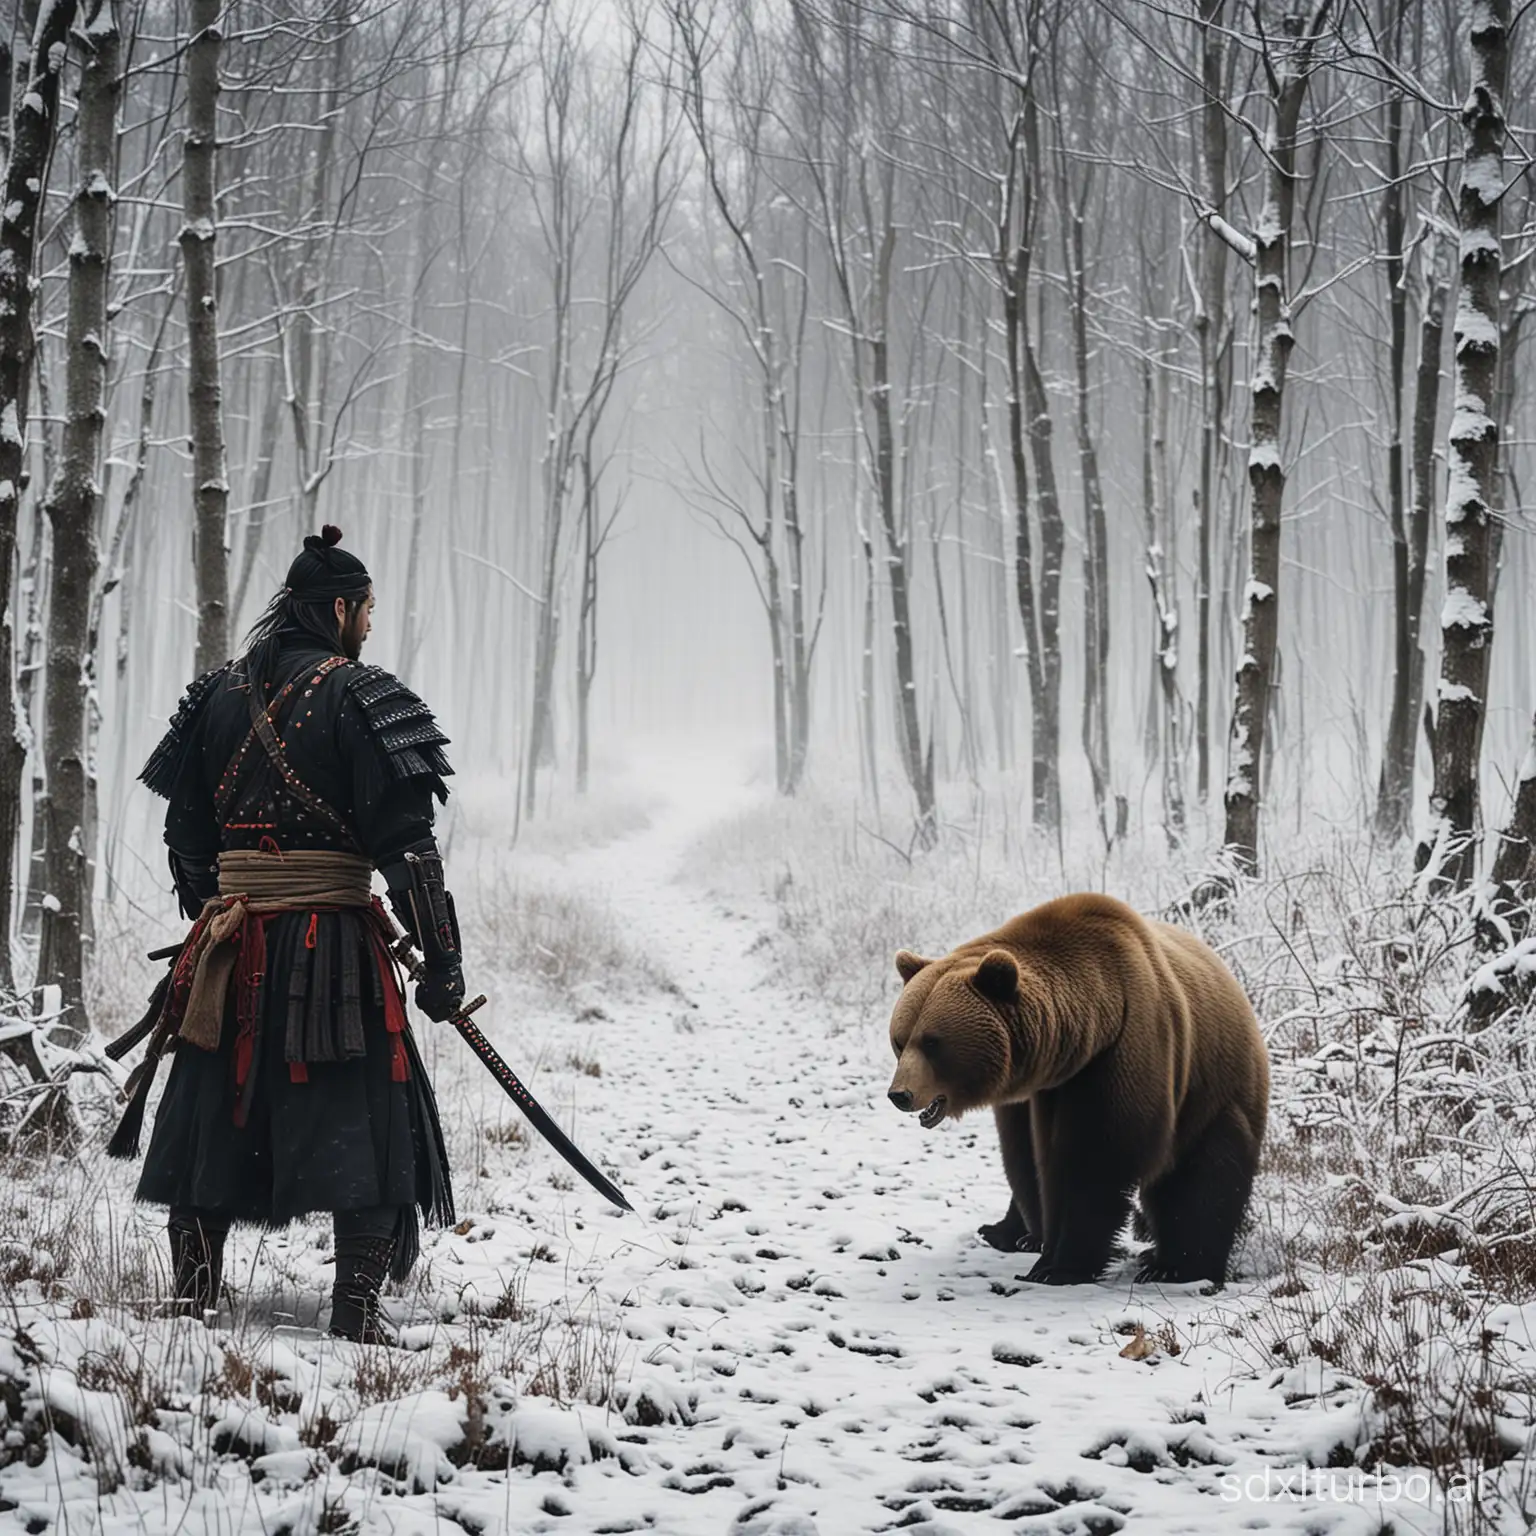 Epic-Samurai-Battle-with-Bear-in-Winter-Forest